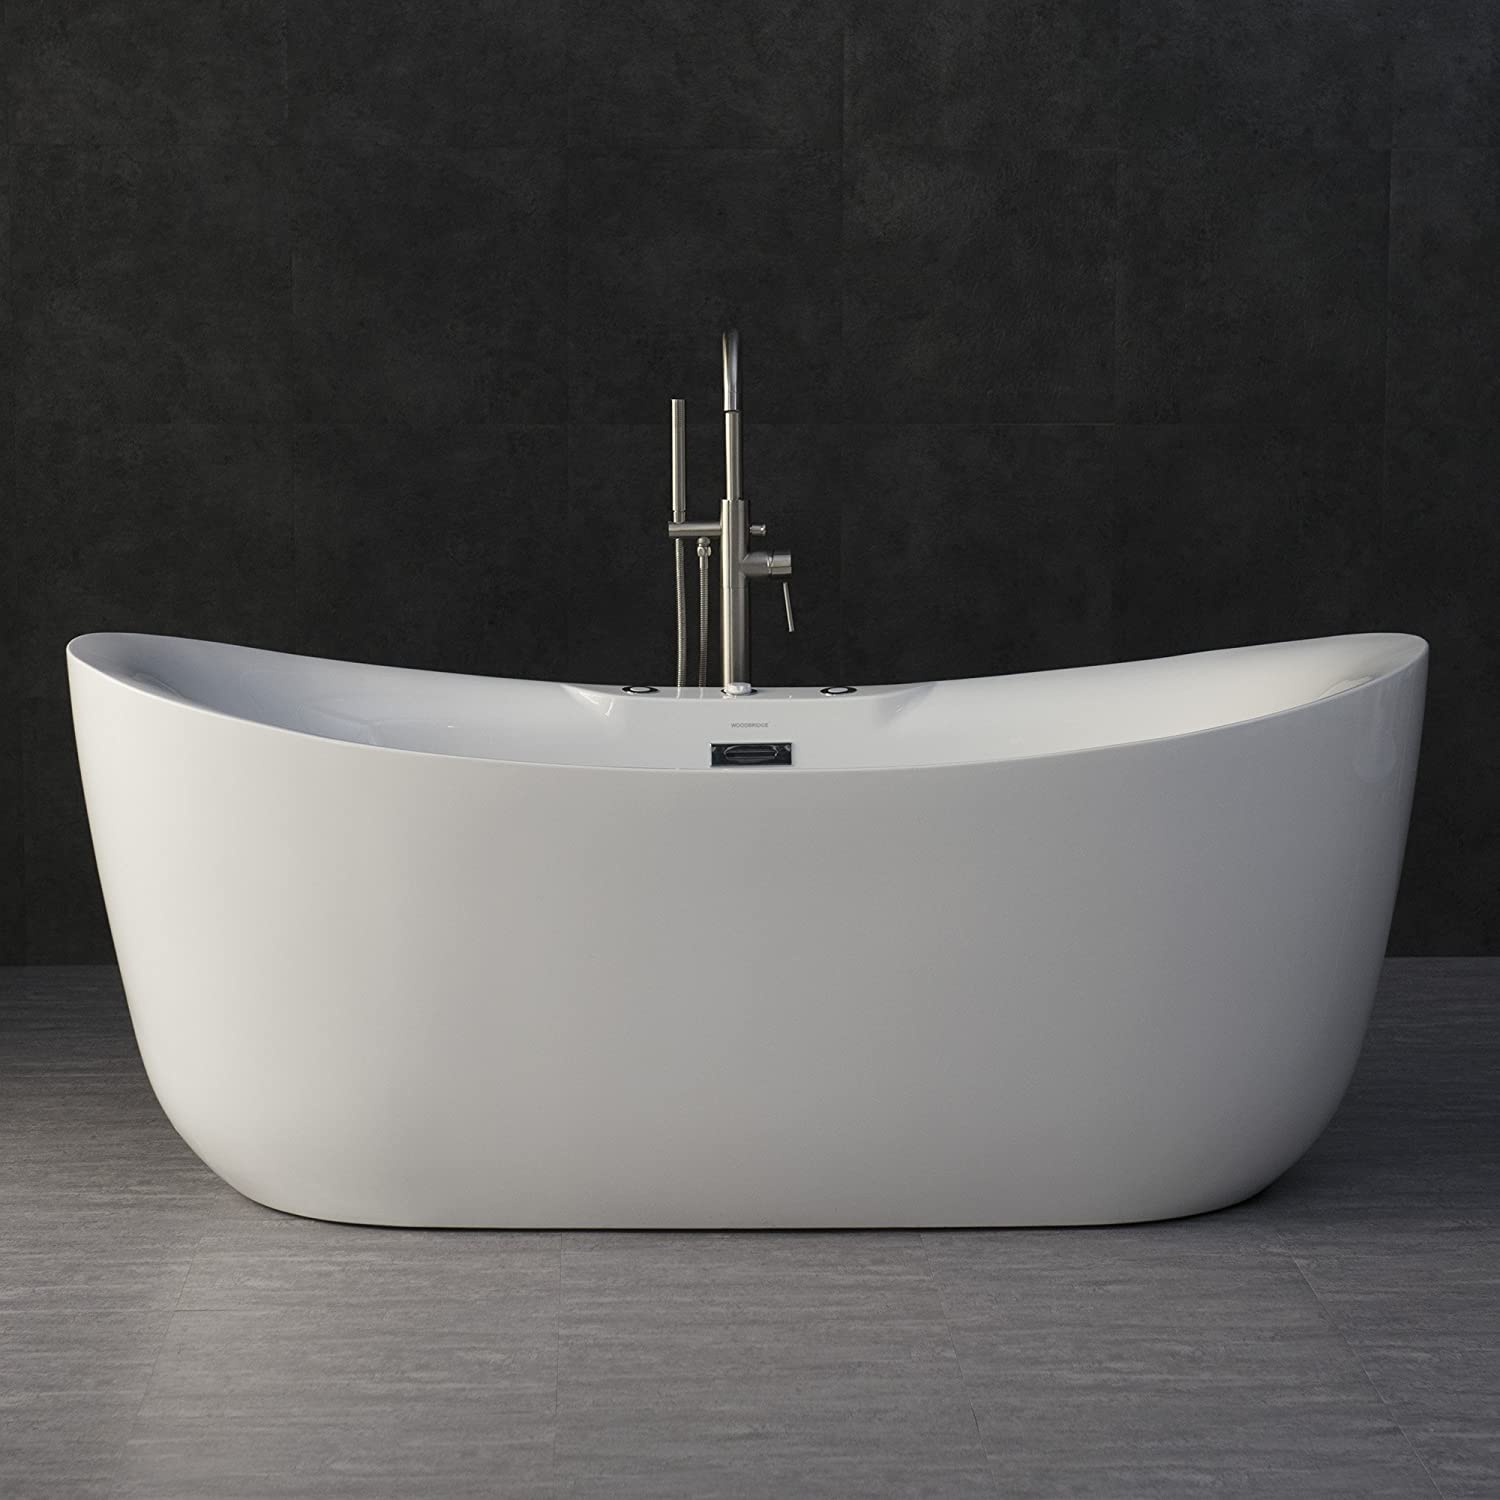 WOODBRIDGE B-0034/BTS1611 Water Jetted and Air Bubble Freestanding Bathtub